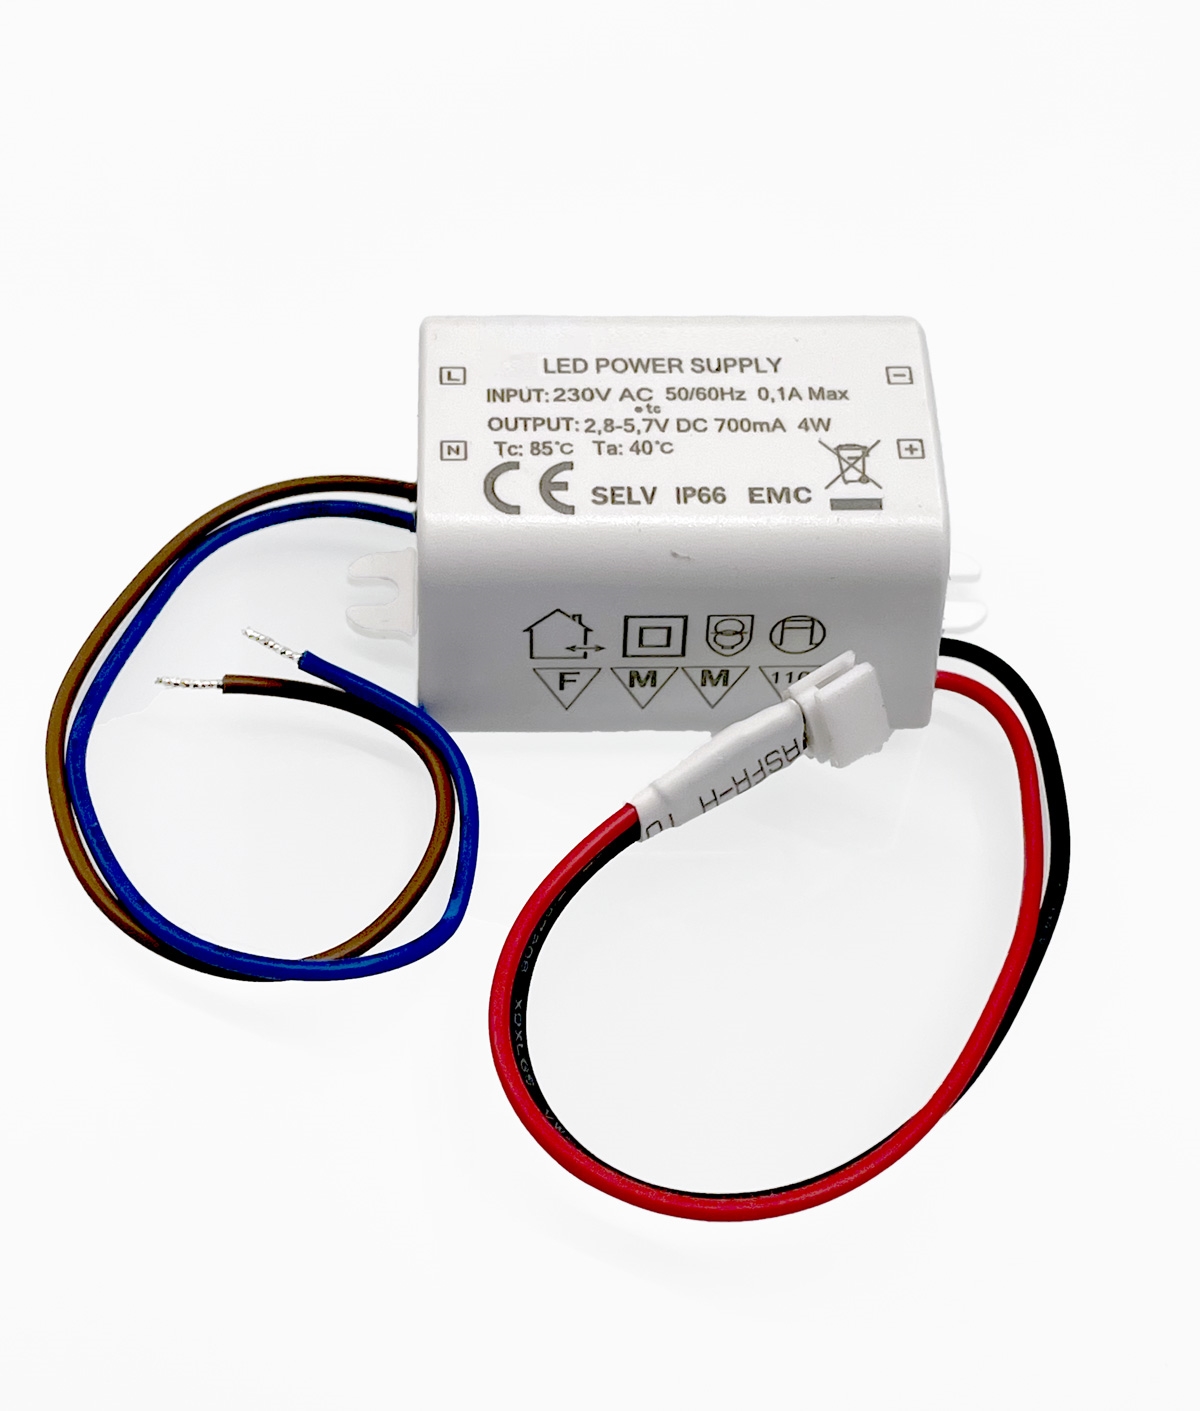 1-3w 700mA Ultra Compact LED Driver - Small enough to fit in behind LED  downlights